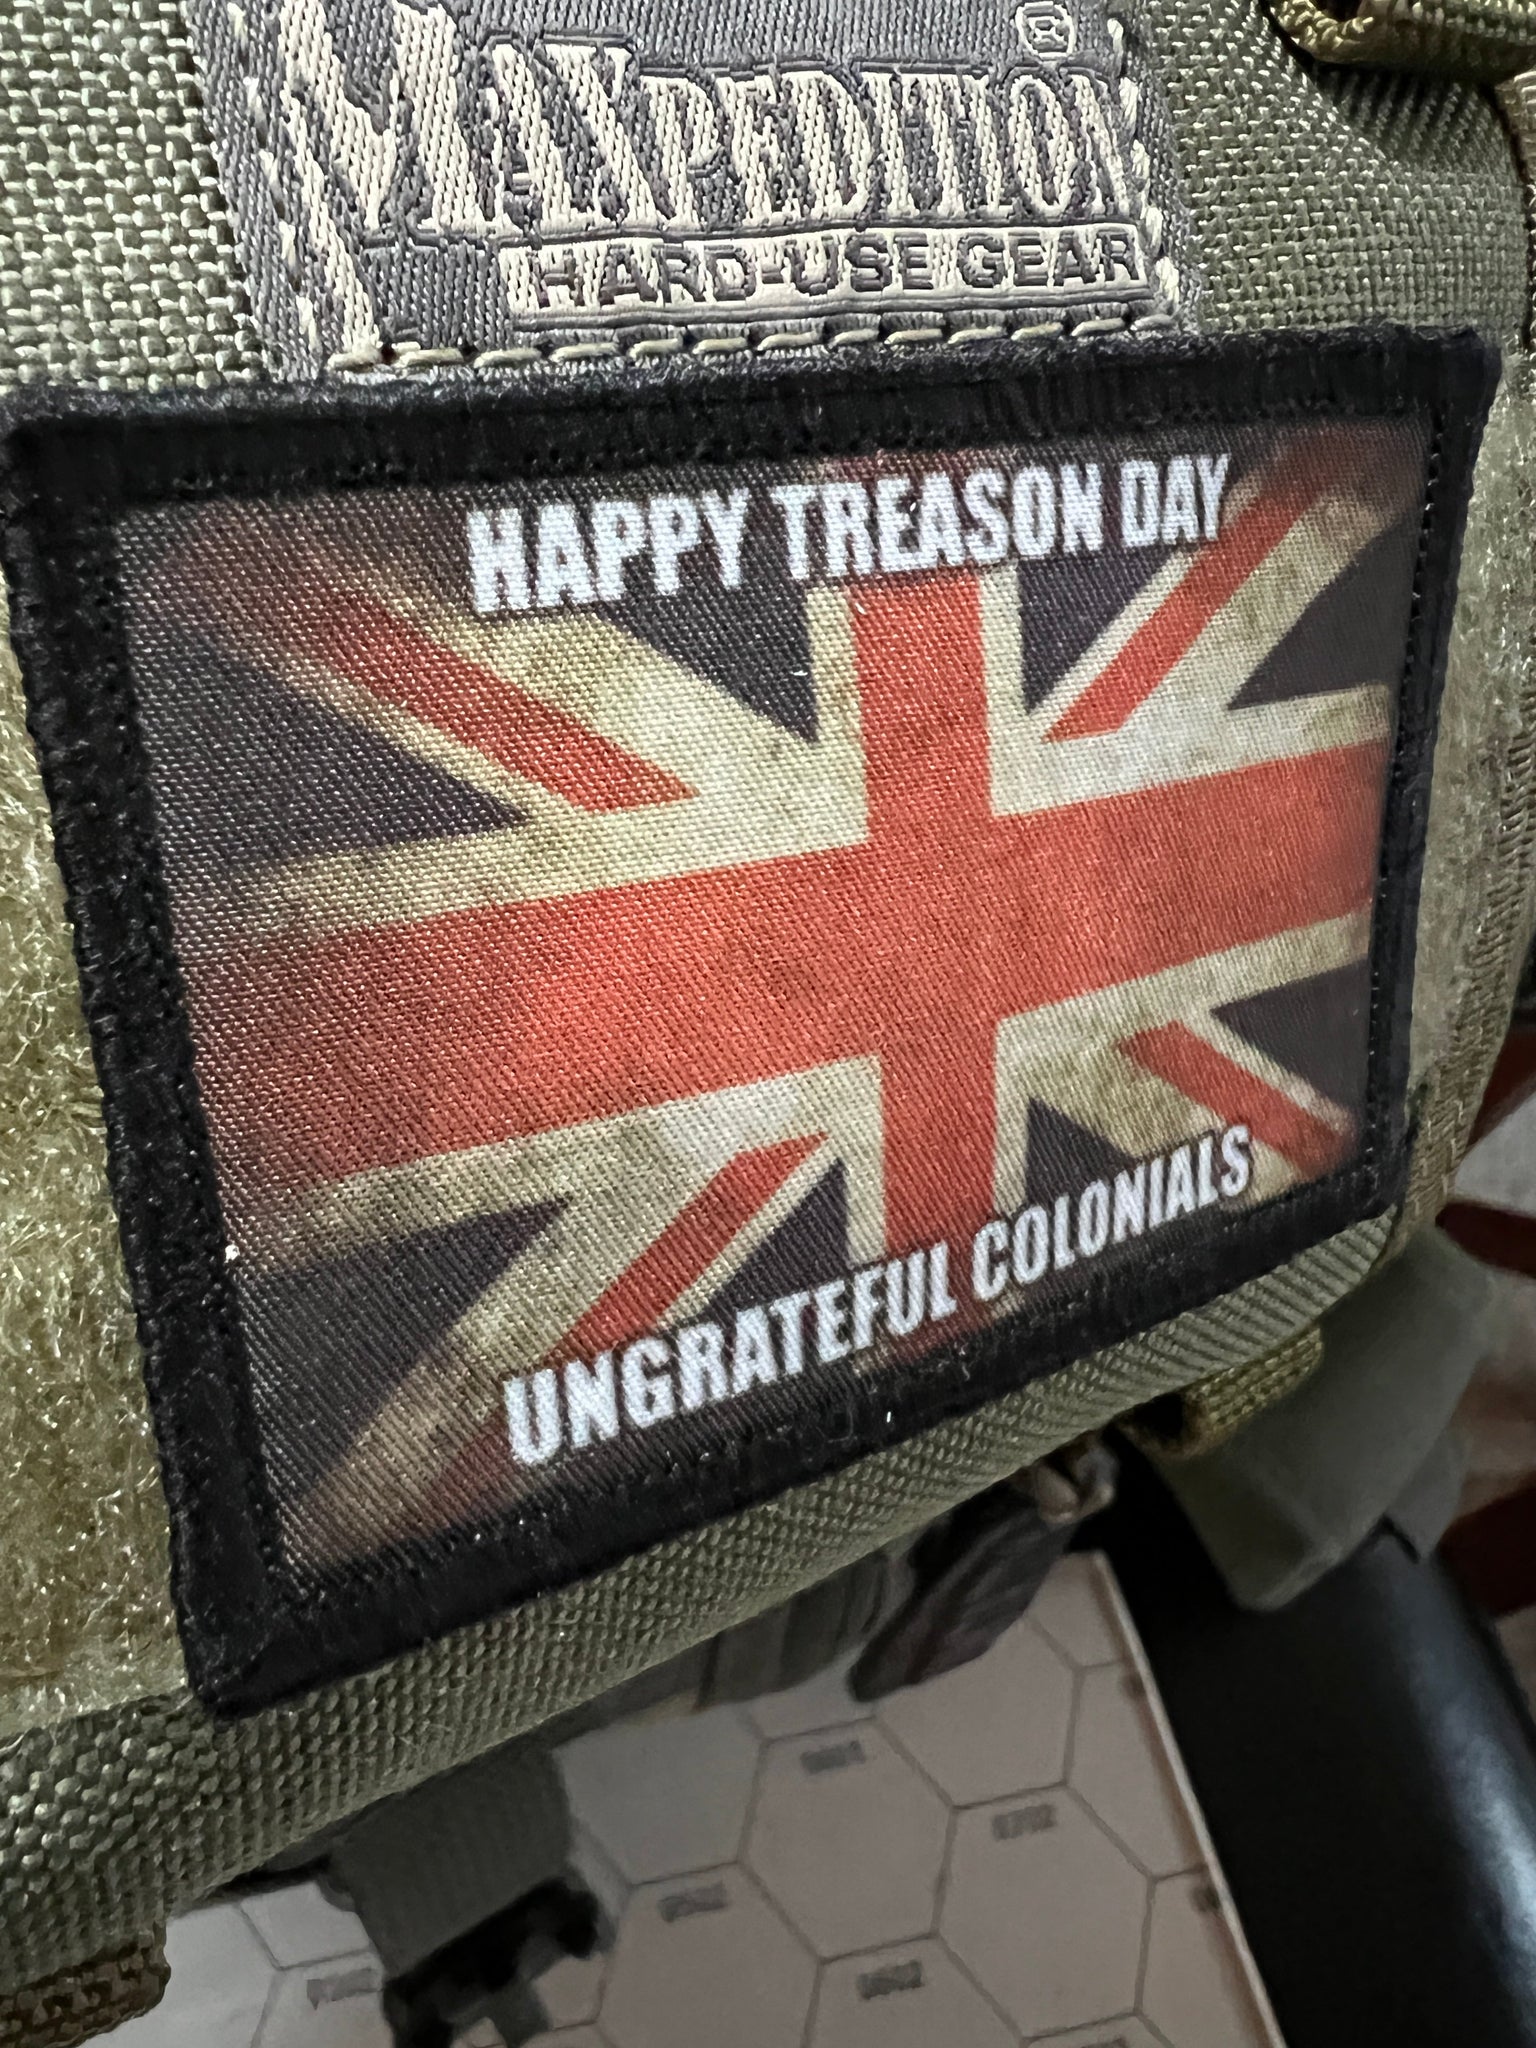 Happy Treason Day Union Jack July 4th Morale Patch Morale Patches Redheaded T Shirts 